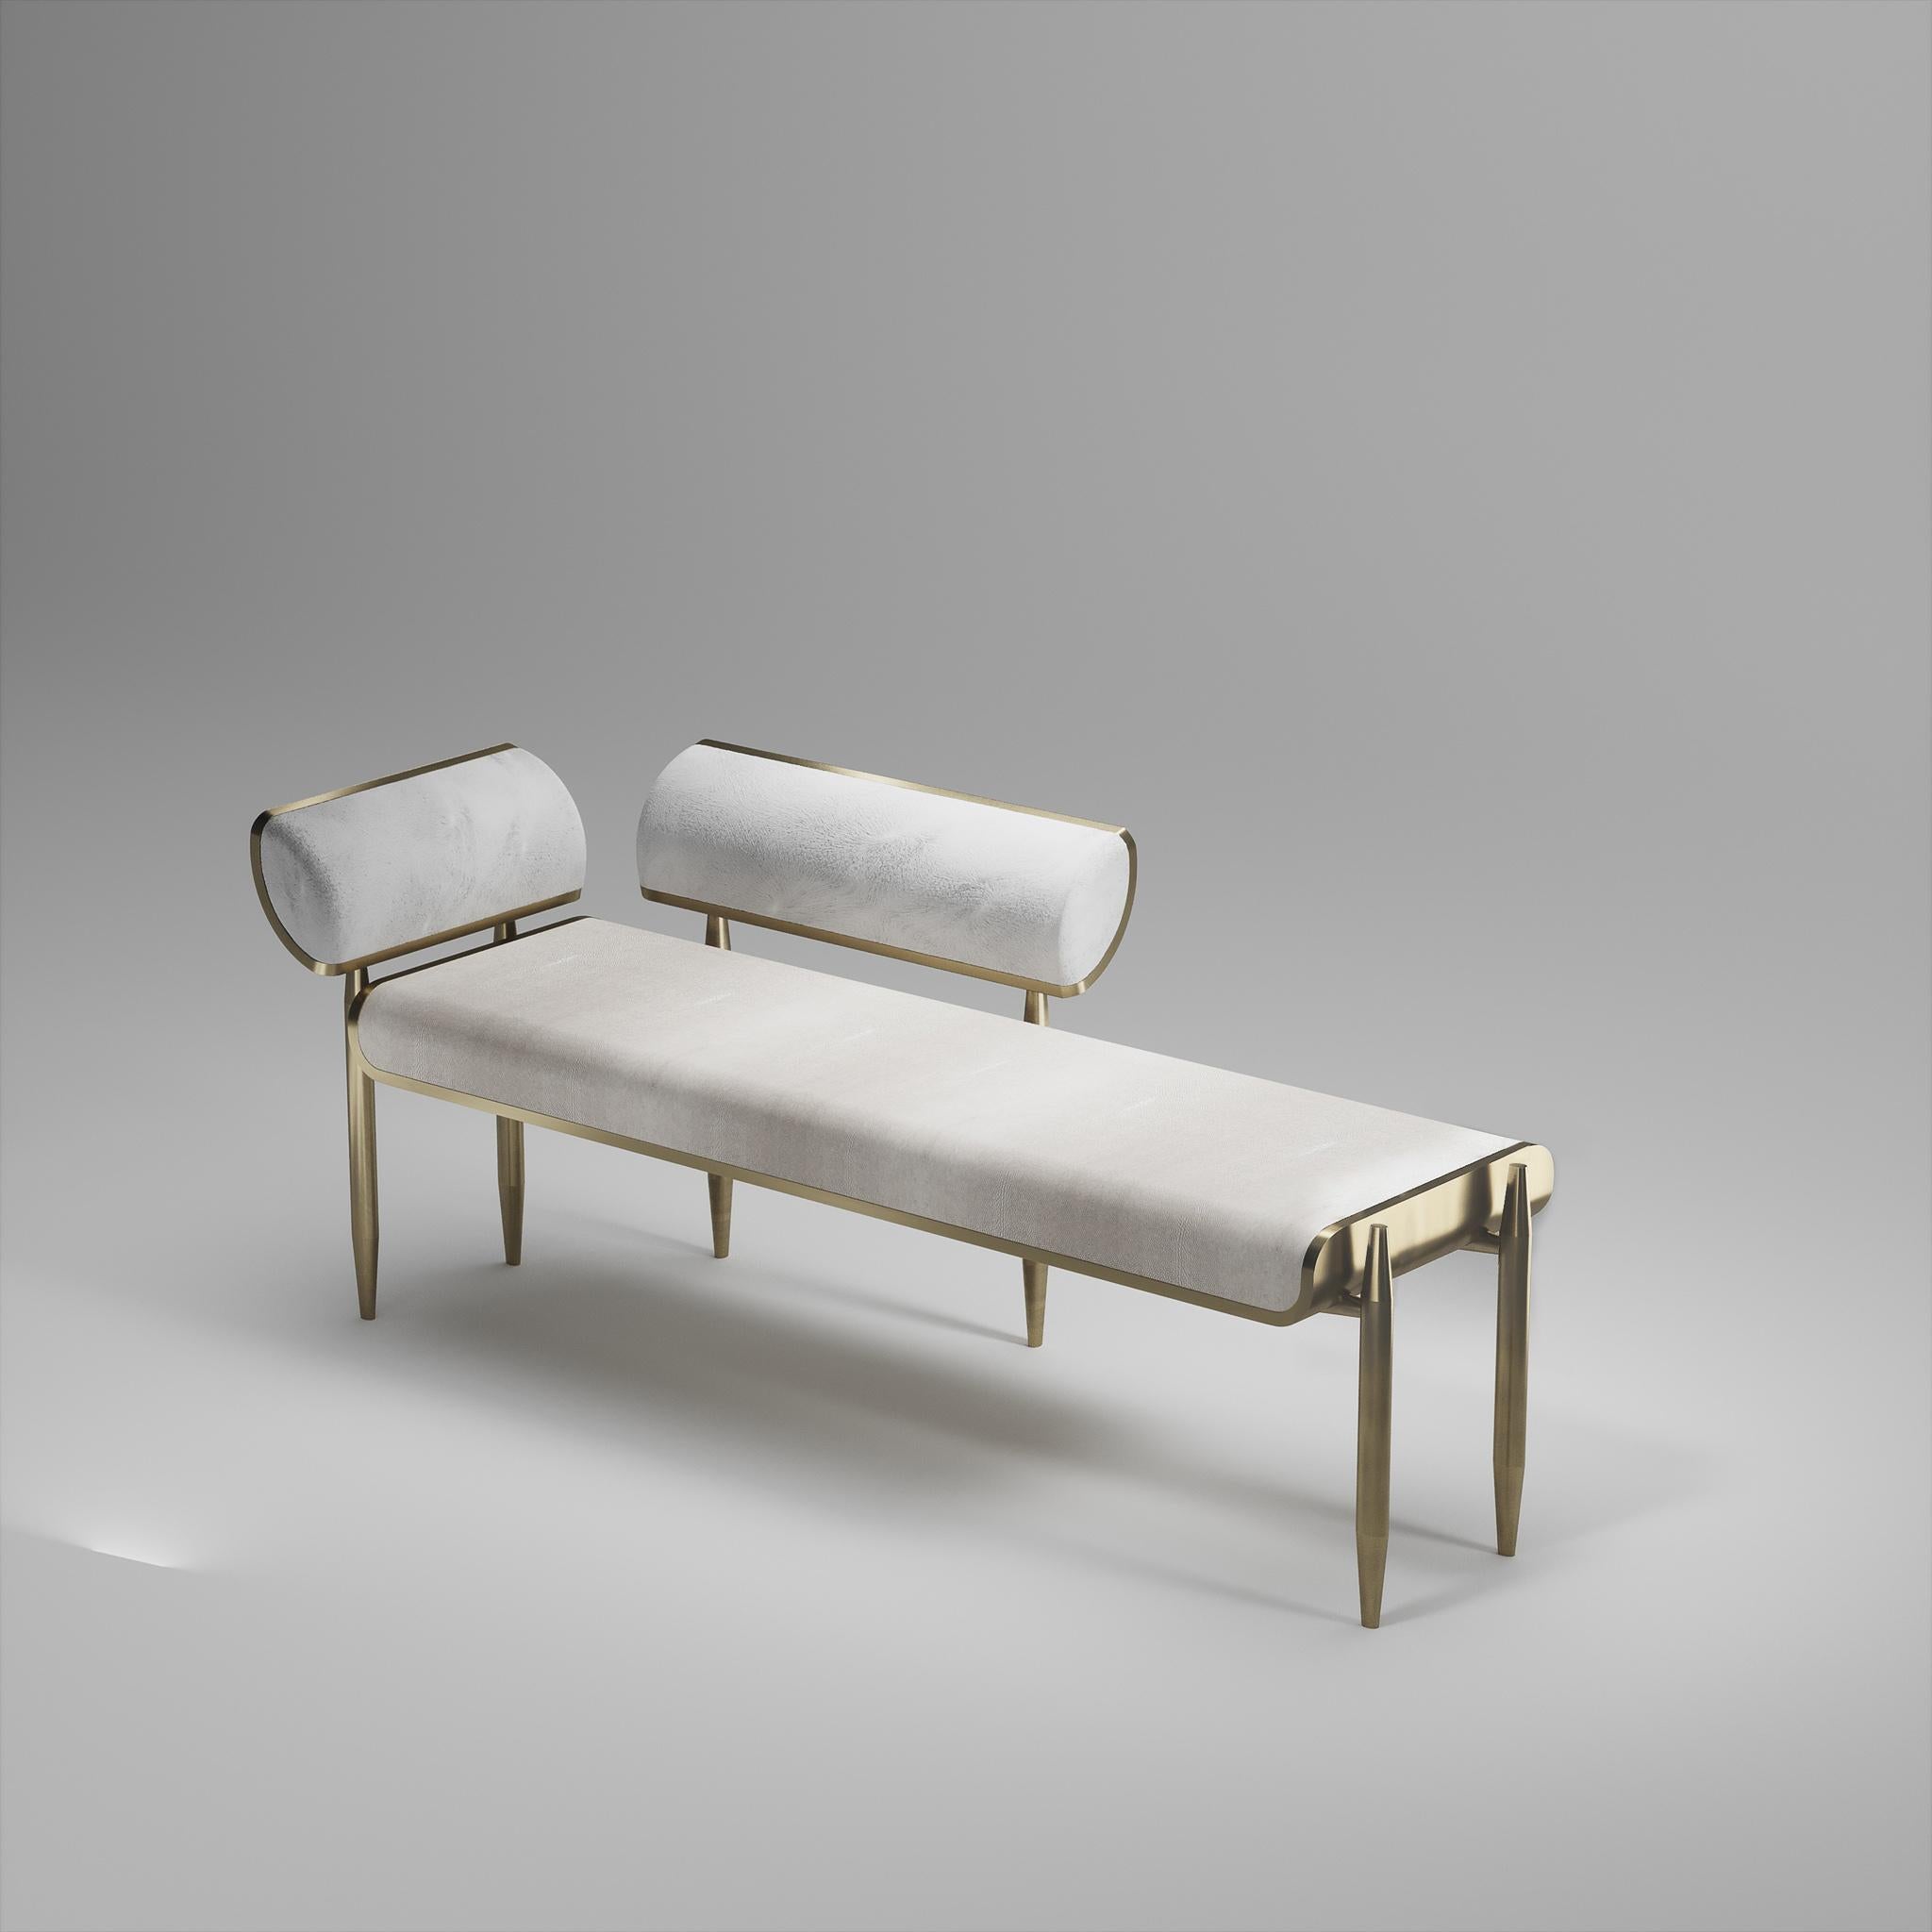 Inspired by the original Dandy bench by Kifu Paris (see images at end of slide), the Dandy II day bed is the ultimate luxury seating. The seating area is inlaid in cream shagreen and the frame, legs and sides of the bench are completely inlaid in